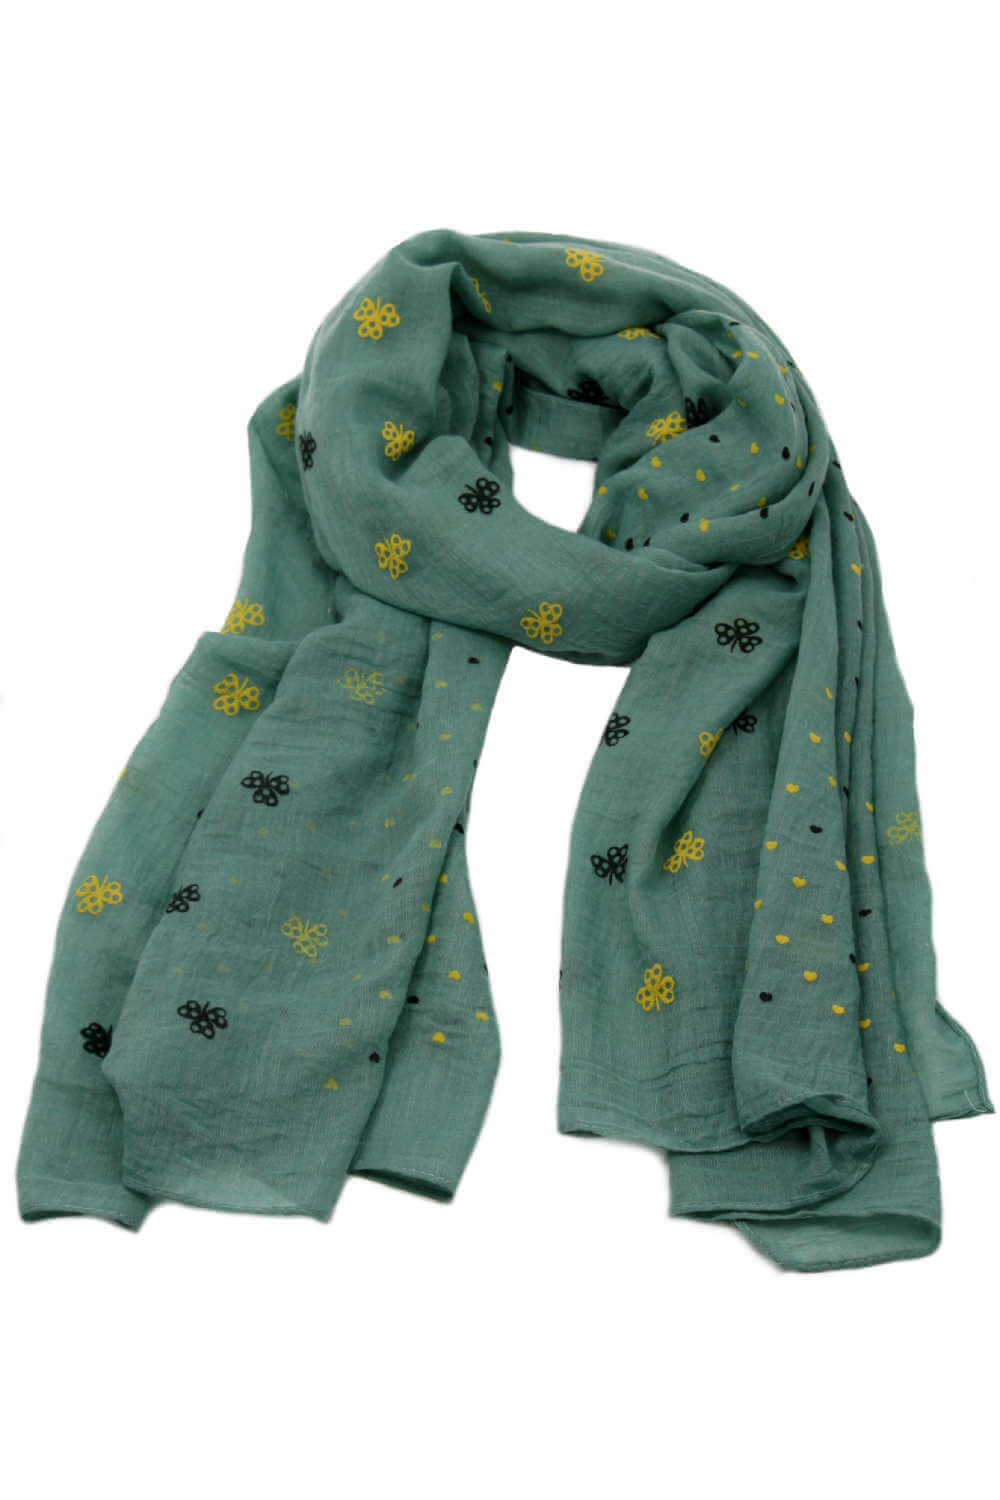 Ladies-scarf-green-floral-heart-design